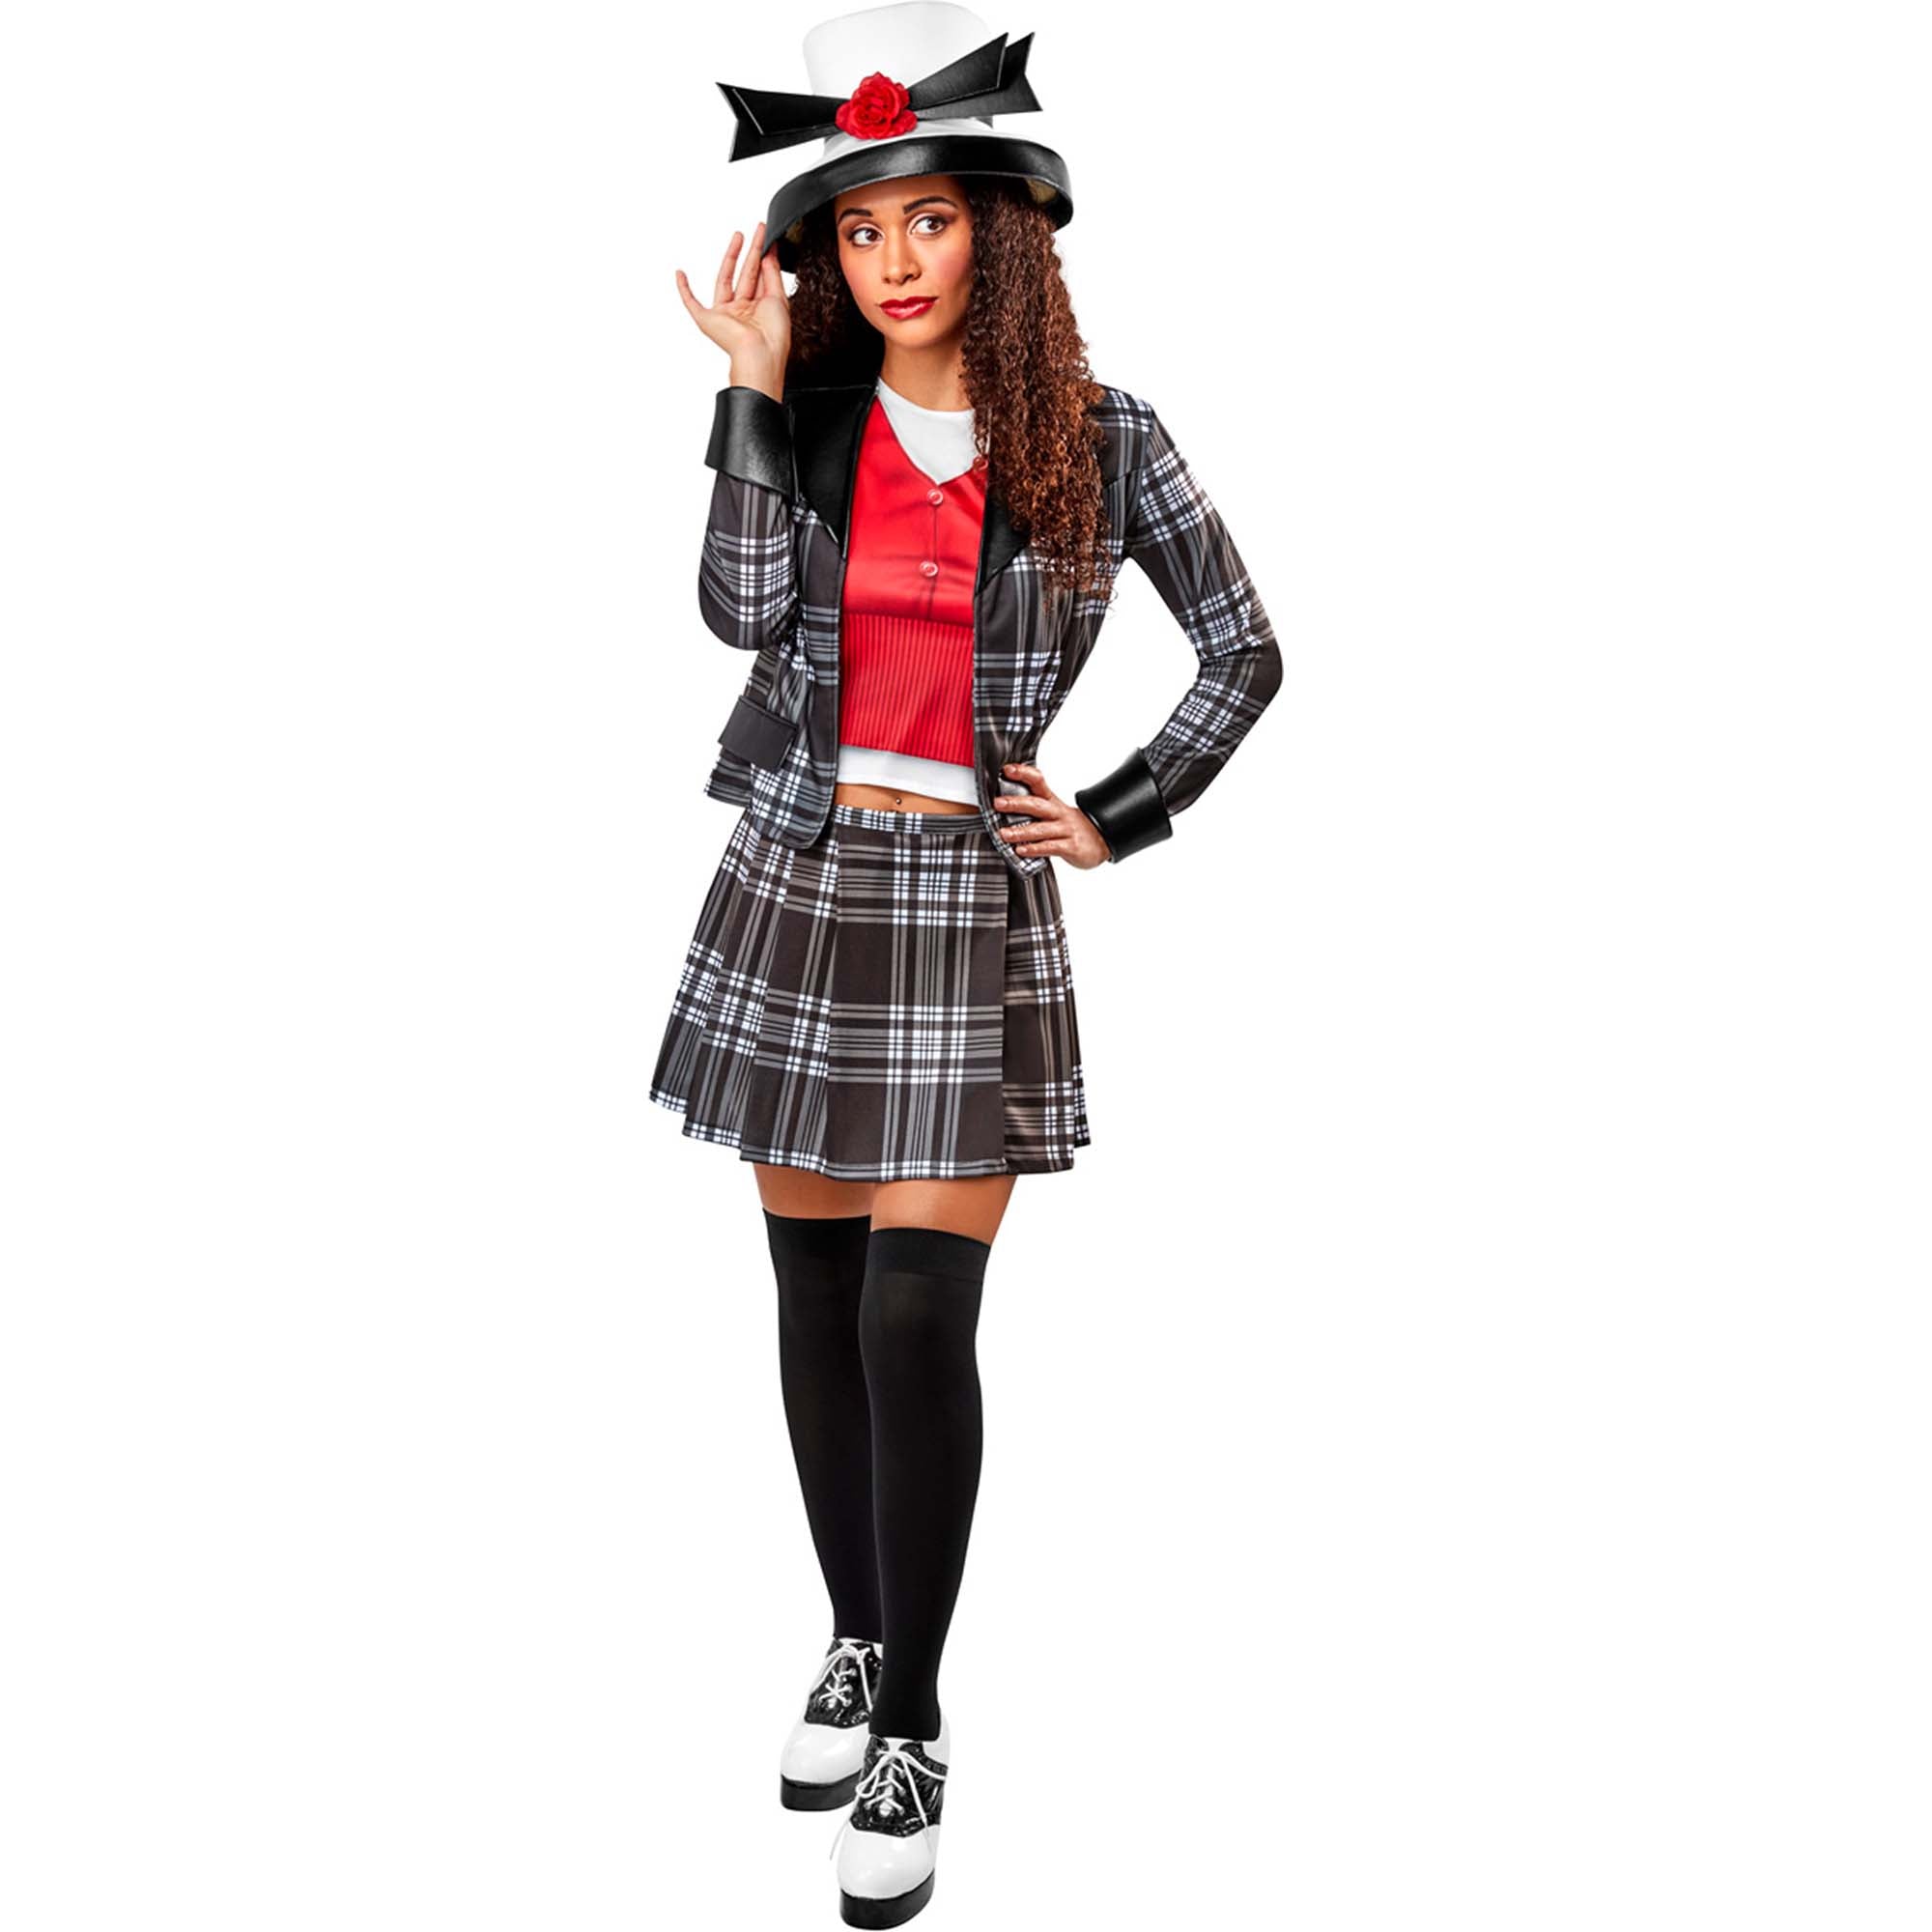 Clueless Dionne Costume for Adults, Black Jacket and Skirt